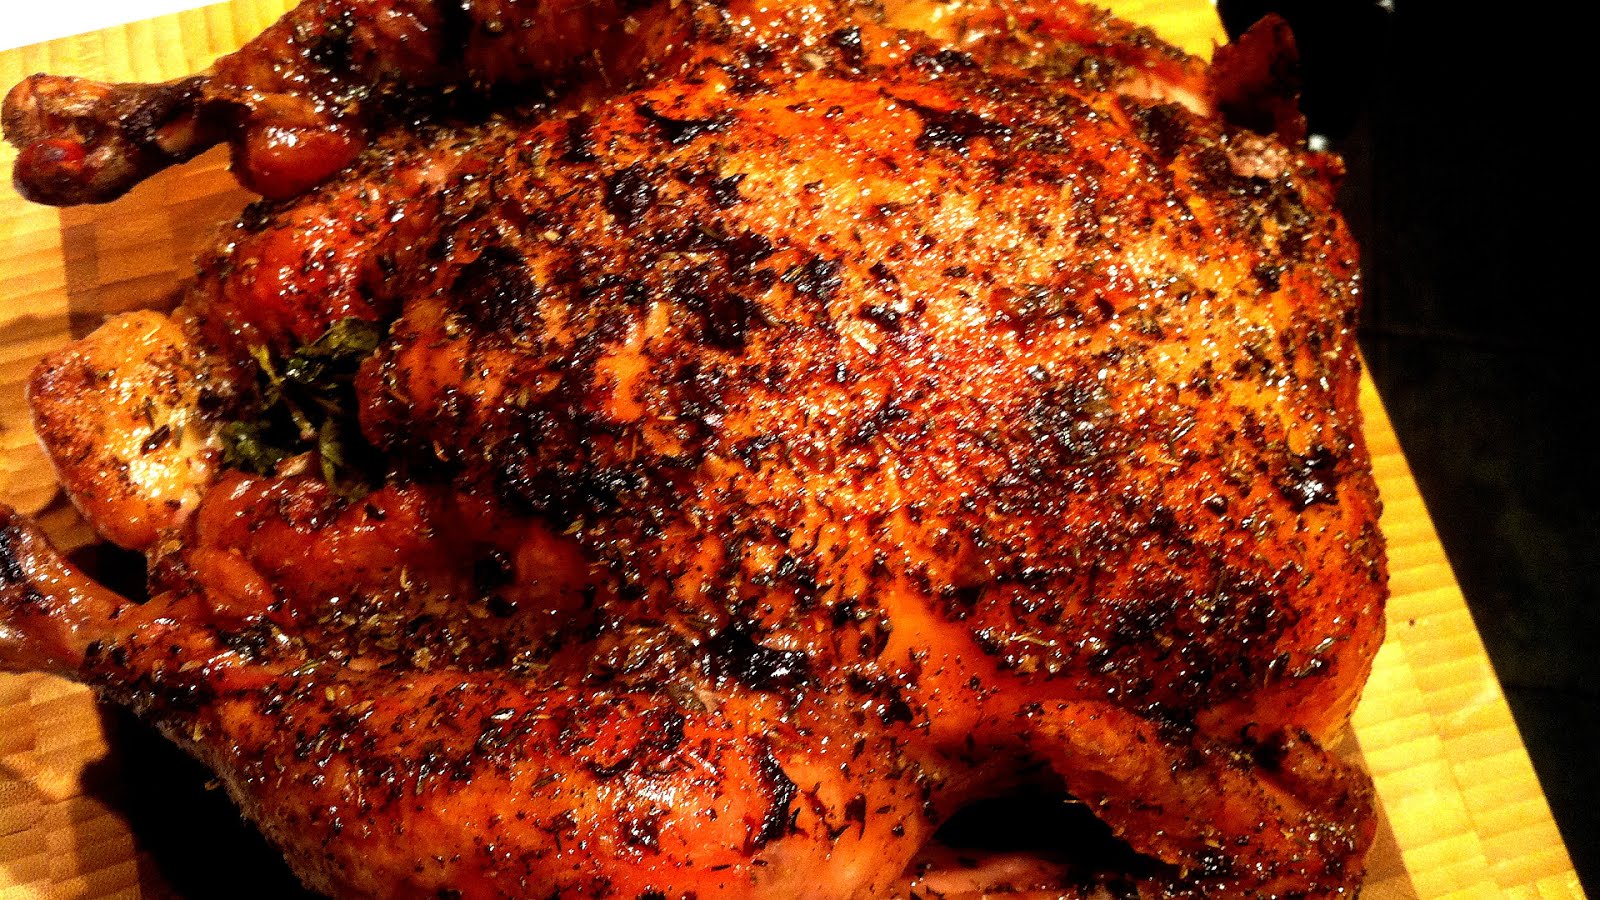 Bake A Whole Chicken At 350 : How Long To Bake A Whole Chicken - Chicken Ch...